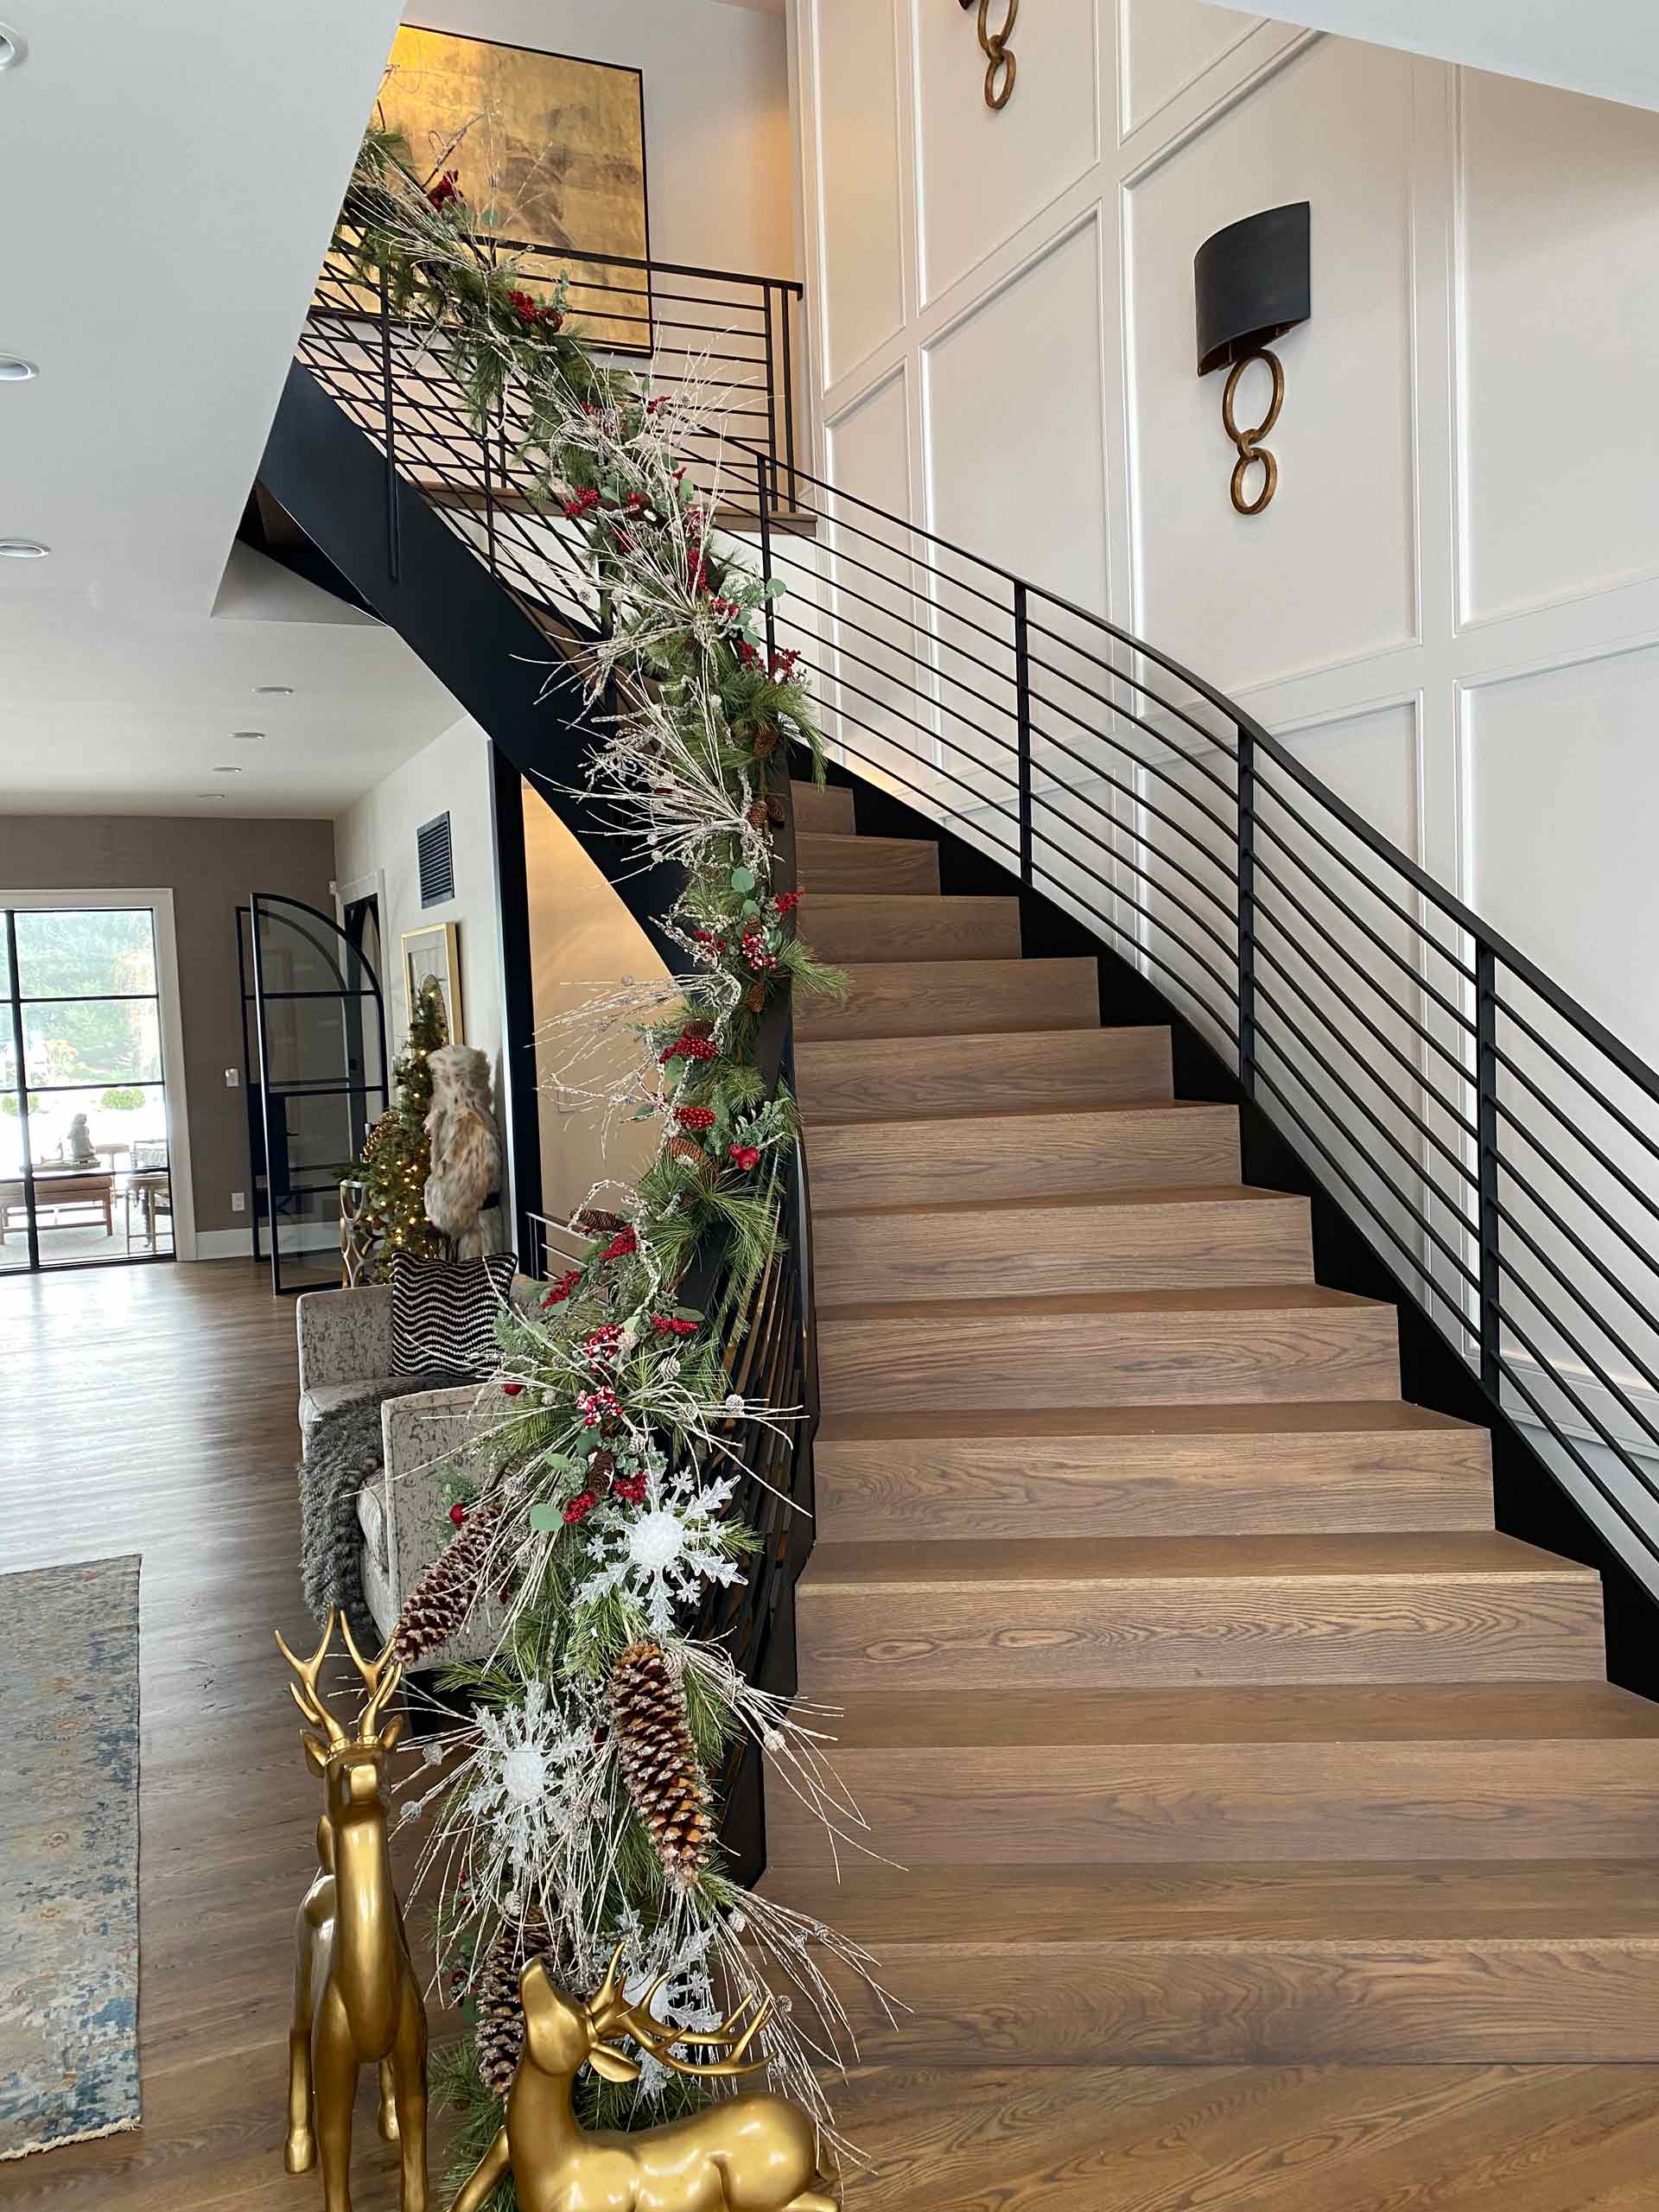 Saucon House Stairway Decorated for the Holidays by GailGray Home